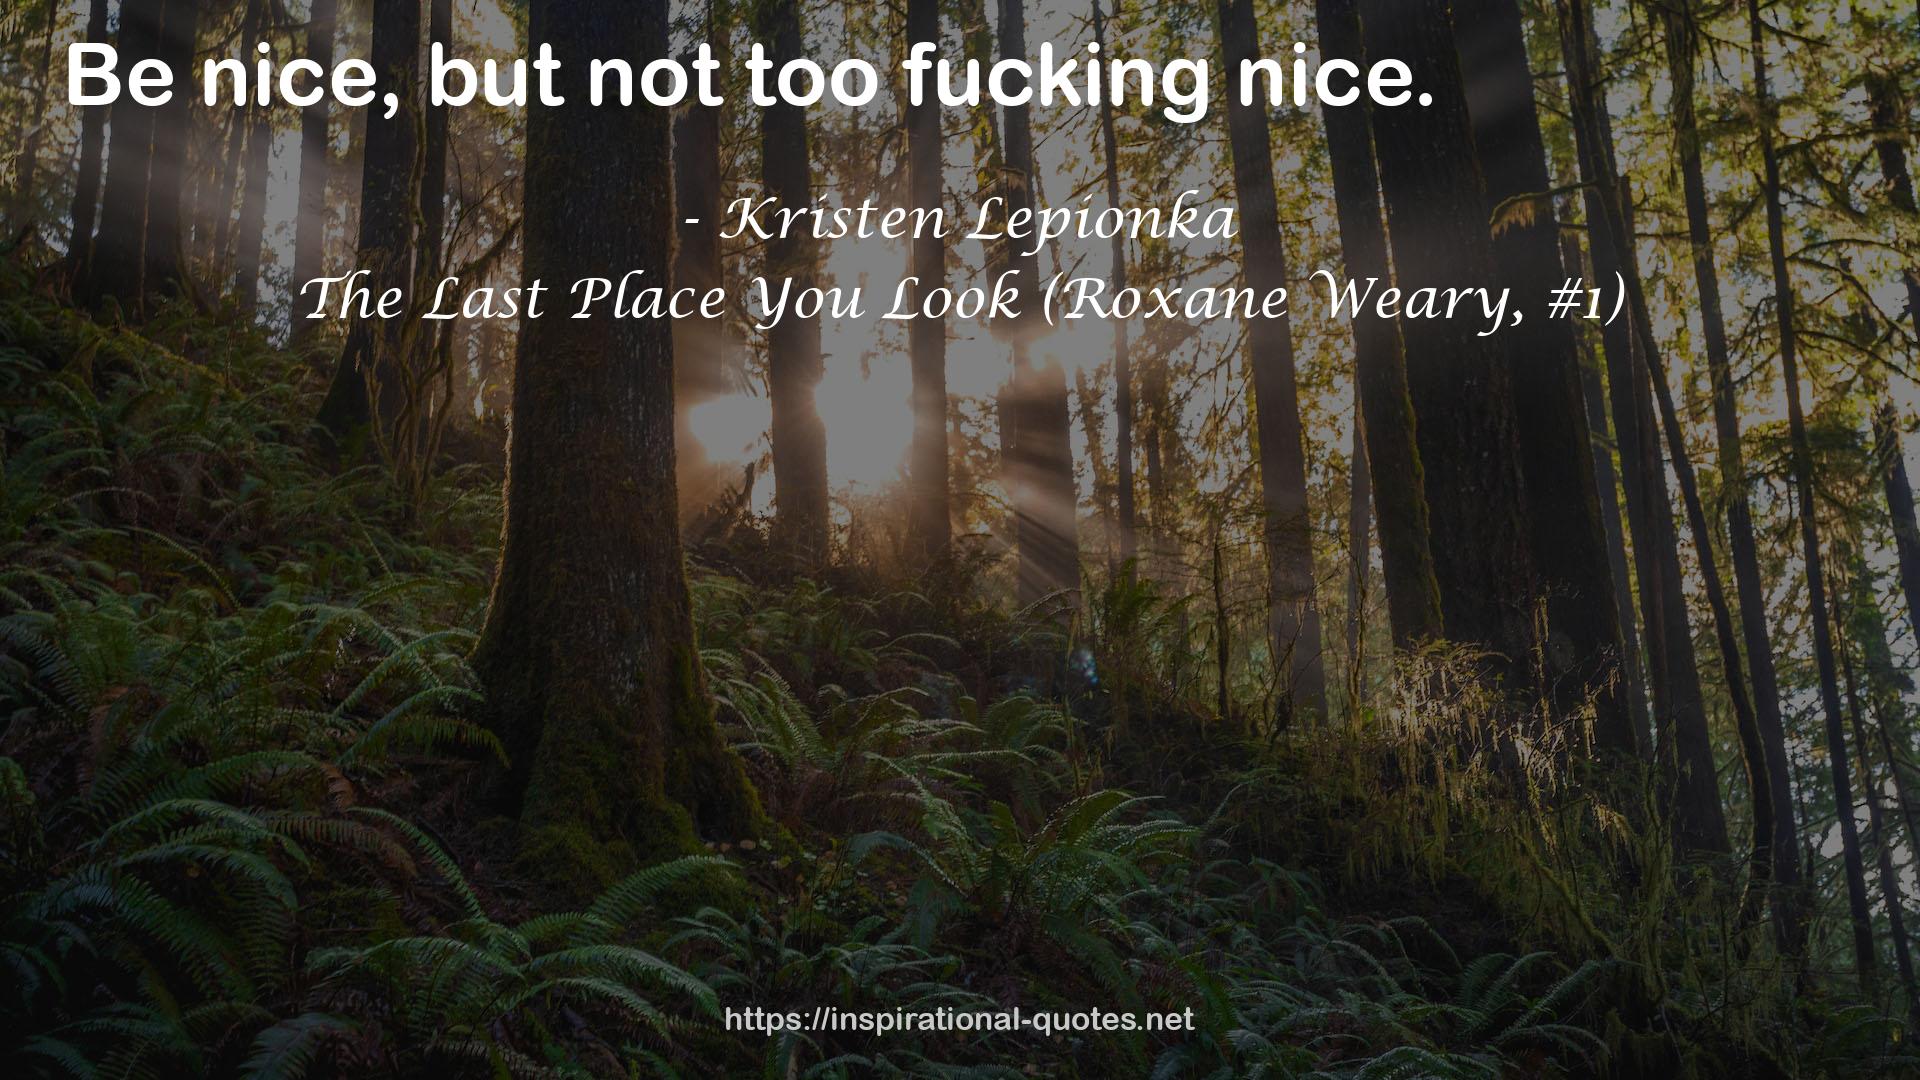 The Last Place You Look (Roxane Weary, #1) QUOTES